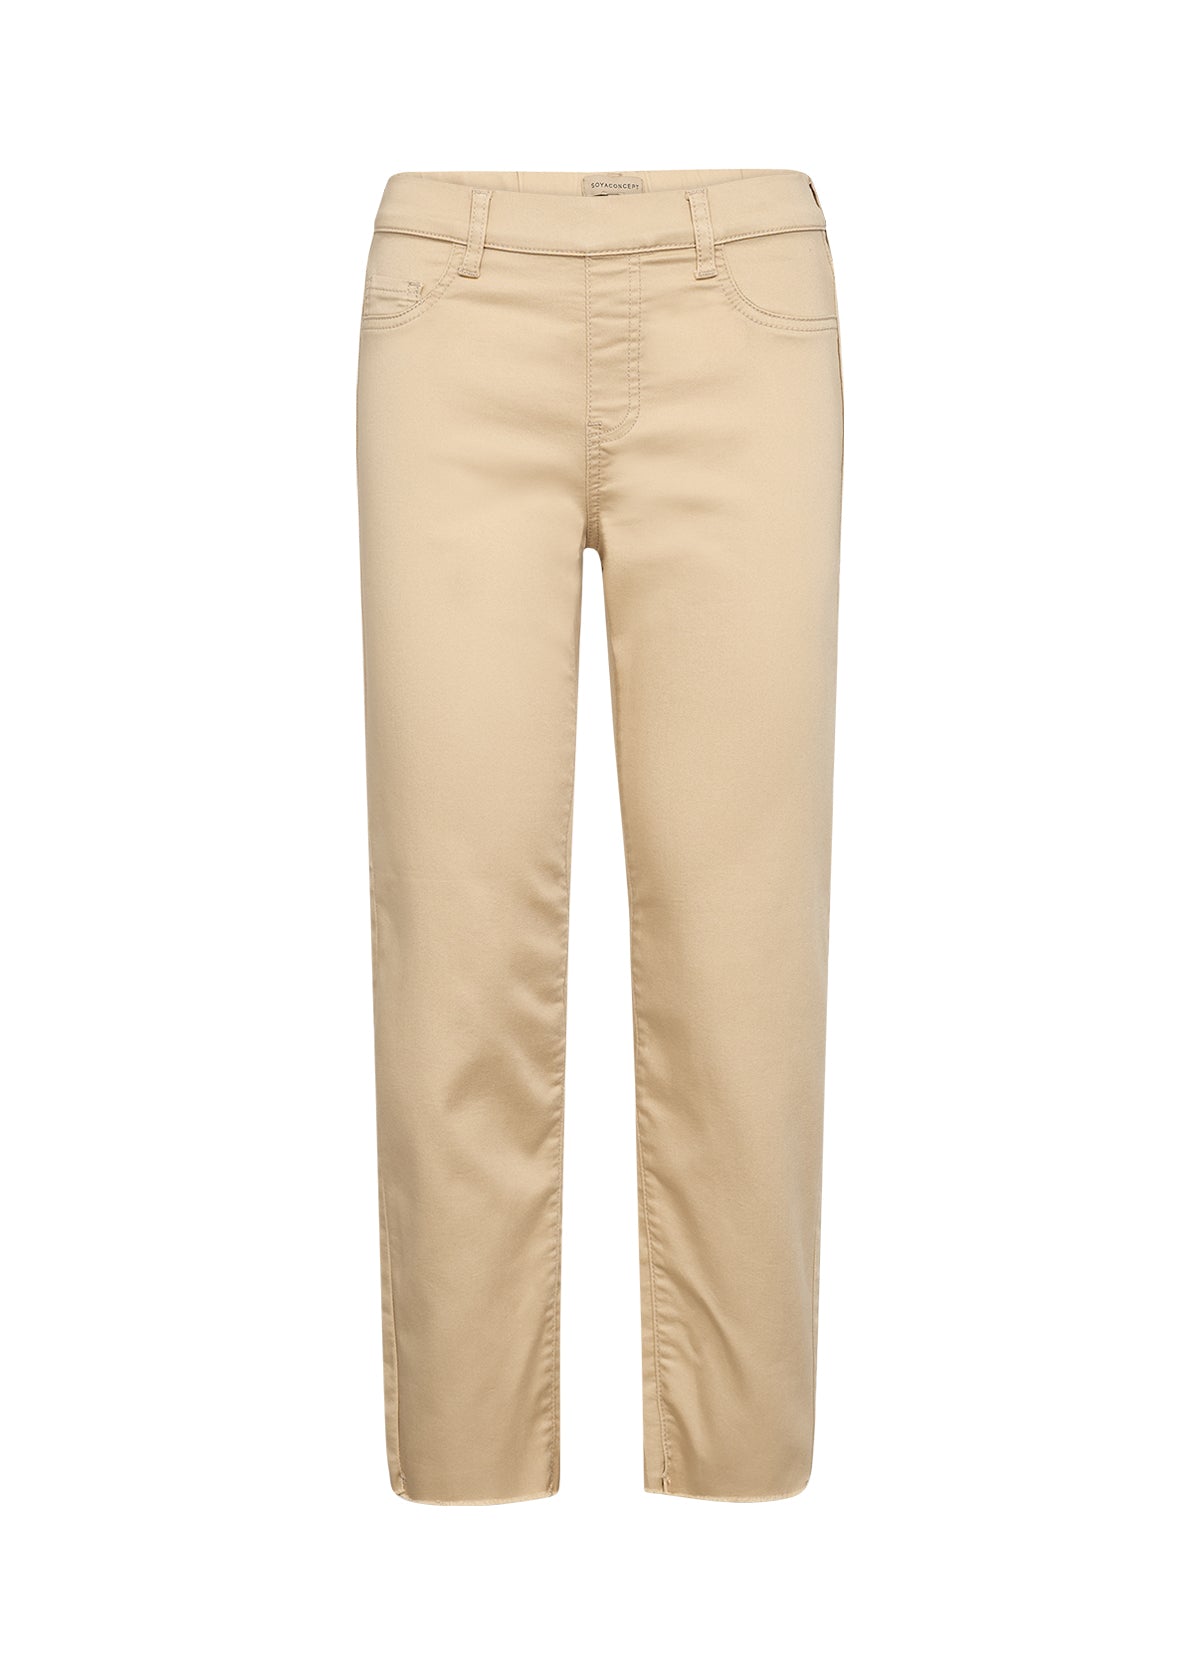 Soya Concept Nadira Trousers in Sand 18154